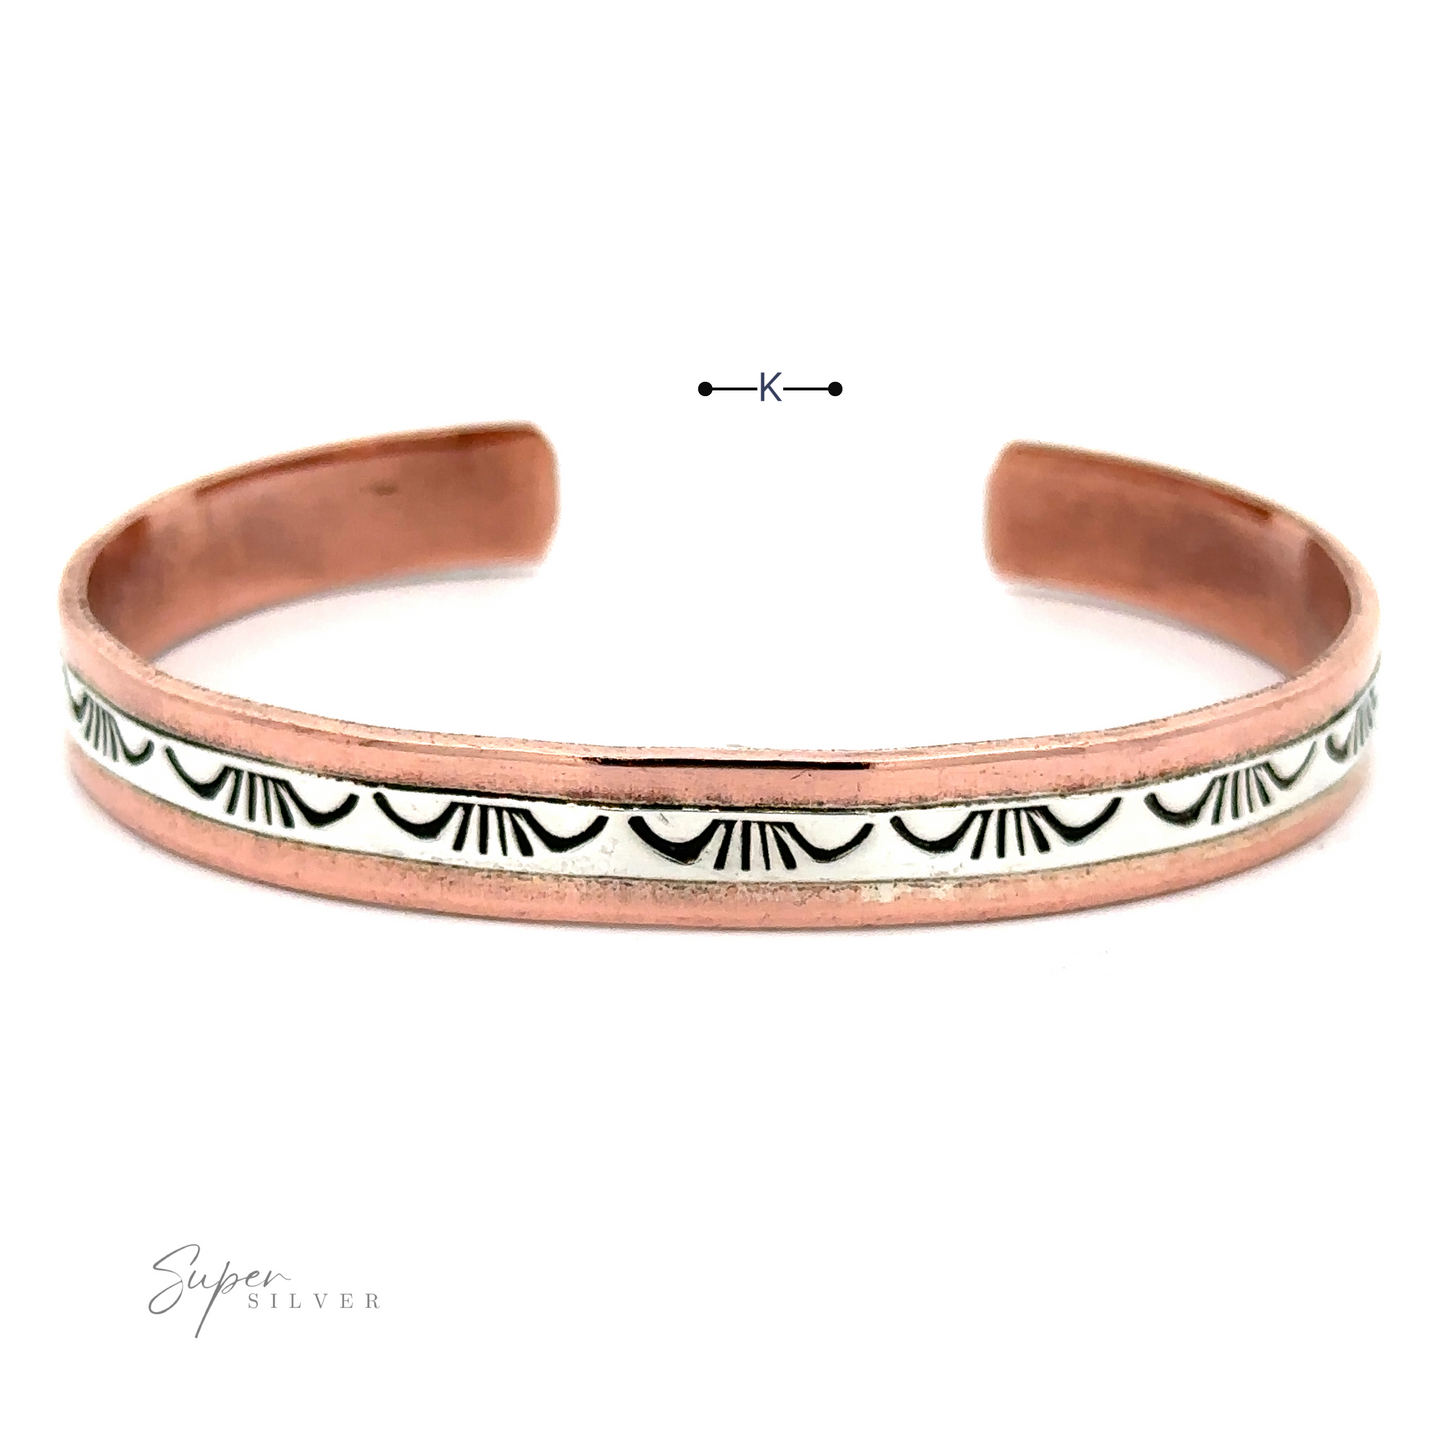 
                  
                    A Native American Handmade Copper And Silver Bracelet with a white enamel band featuring black geometric patterns. The open-ended bracelet showcases "Super Silver" printed on the bottom left, reflecting Native American handcrafted design elements.
                  
                